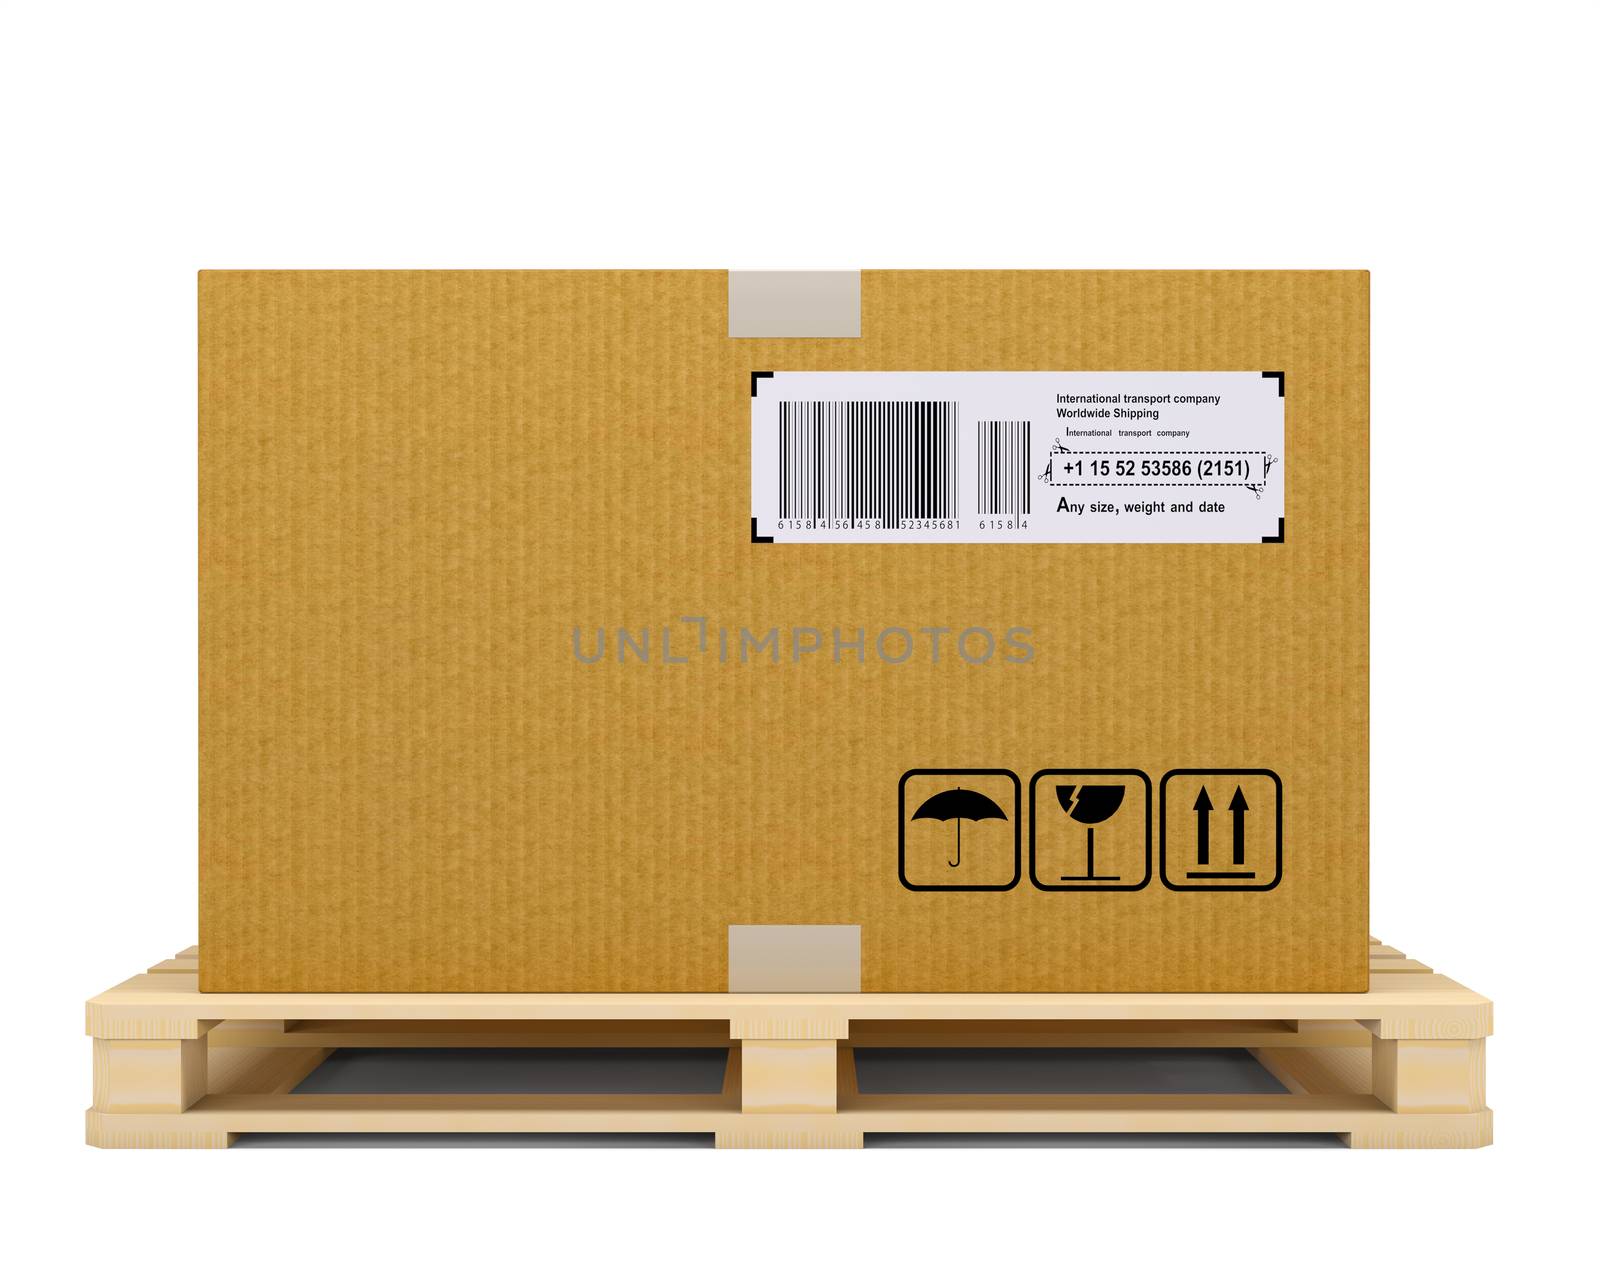 Cardboard box on wooden pallet isolated on white background. Warehouse, shipping, cargo and delivery concept. 3D illustration